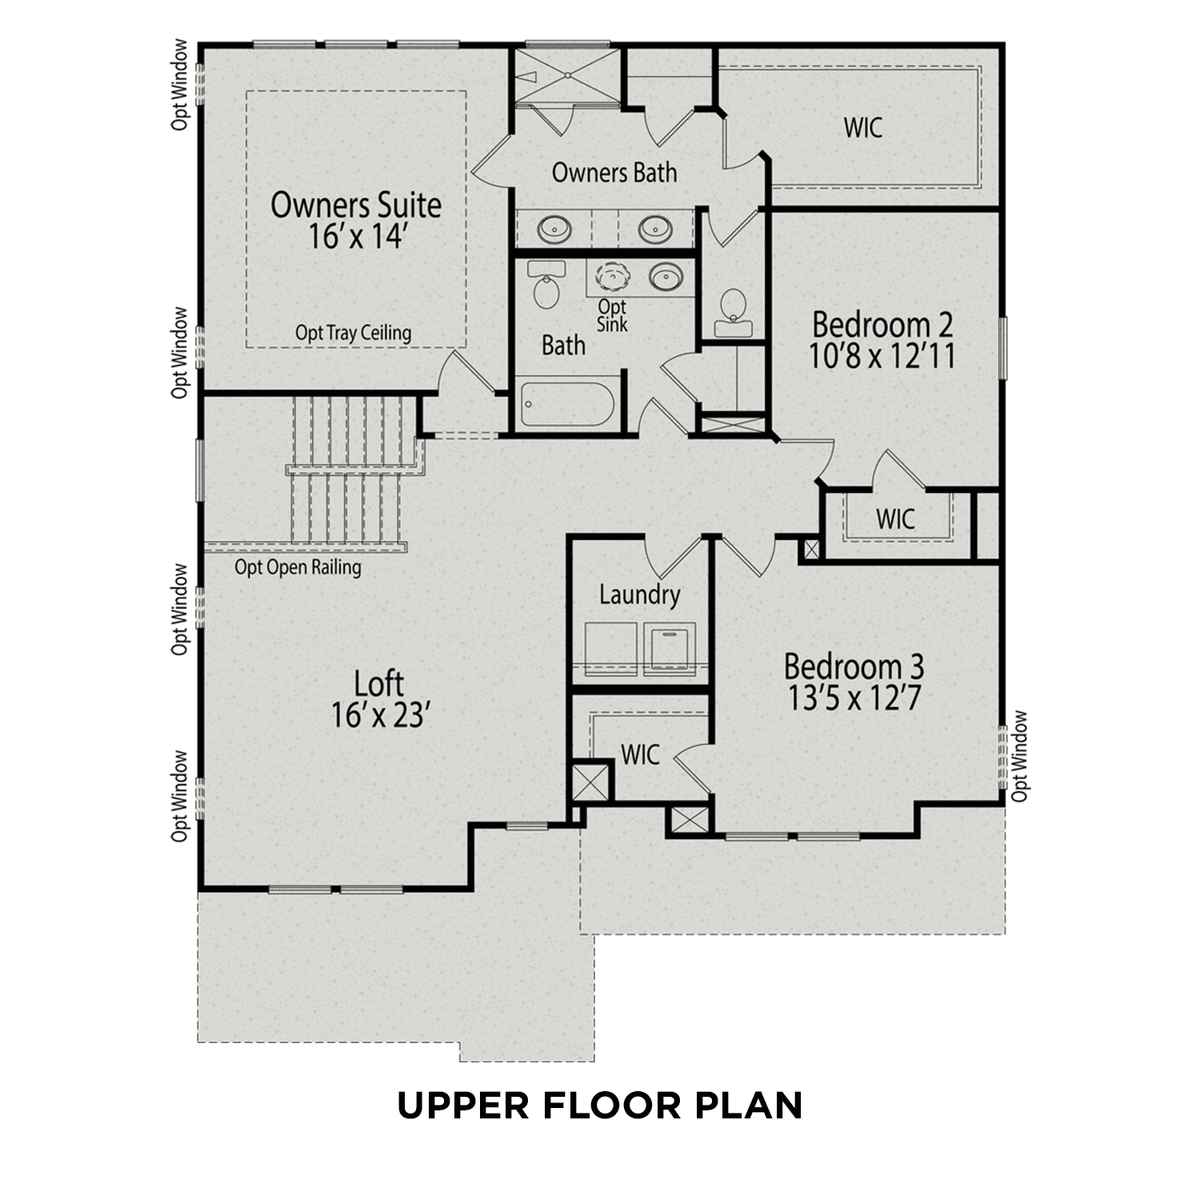 2 - The Chestnut B floor plan layout for 1510 Woodland Knoll Court in Davidson Homes' Highland Forest community.